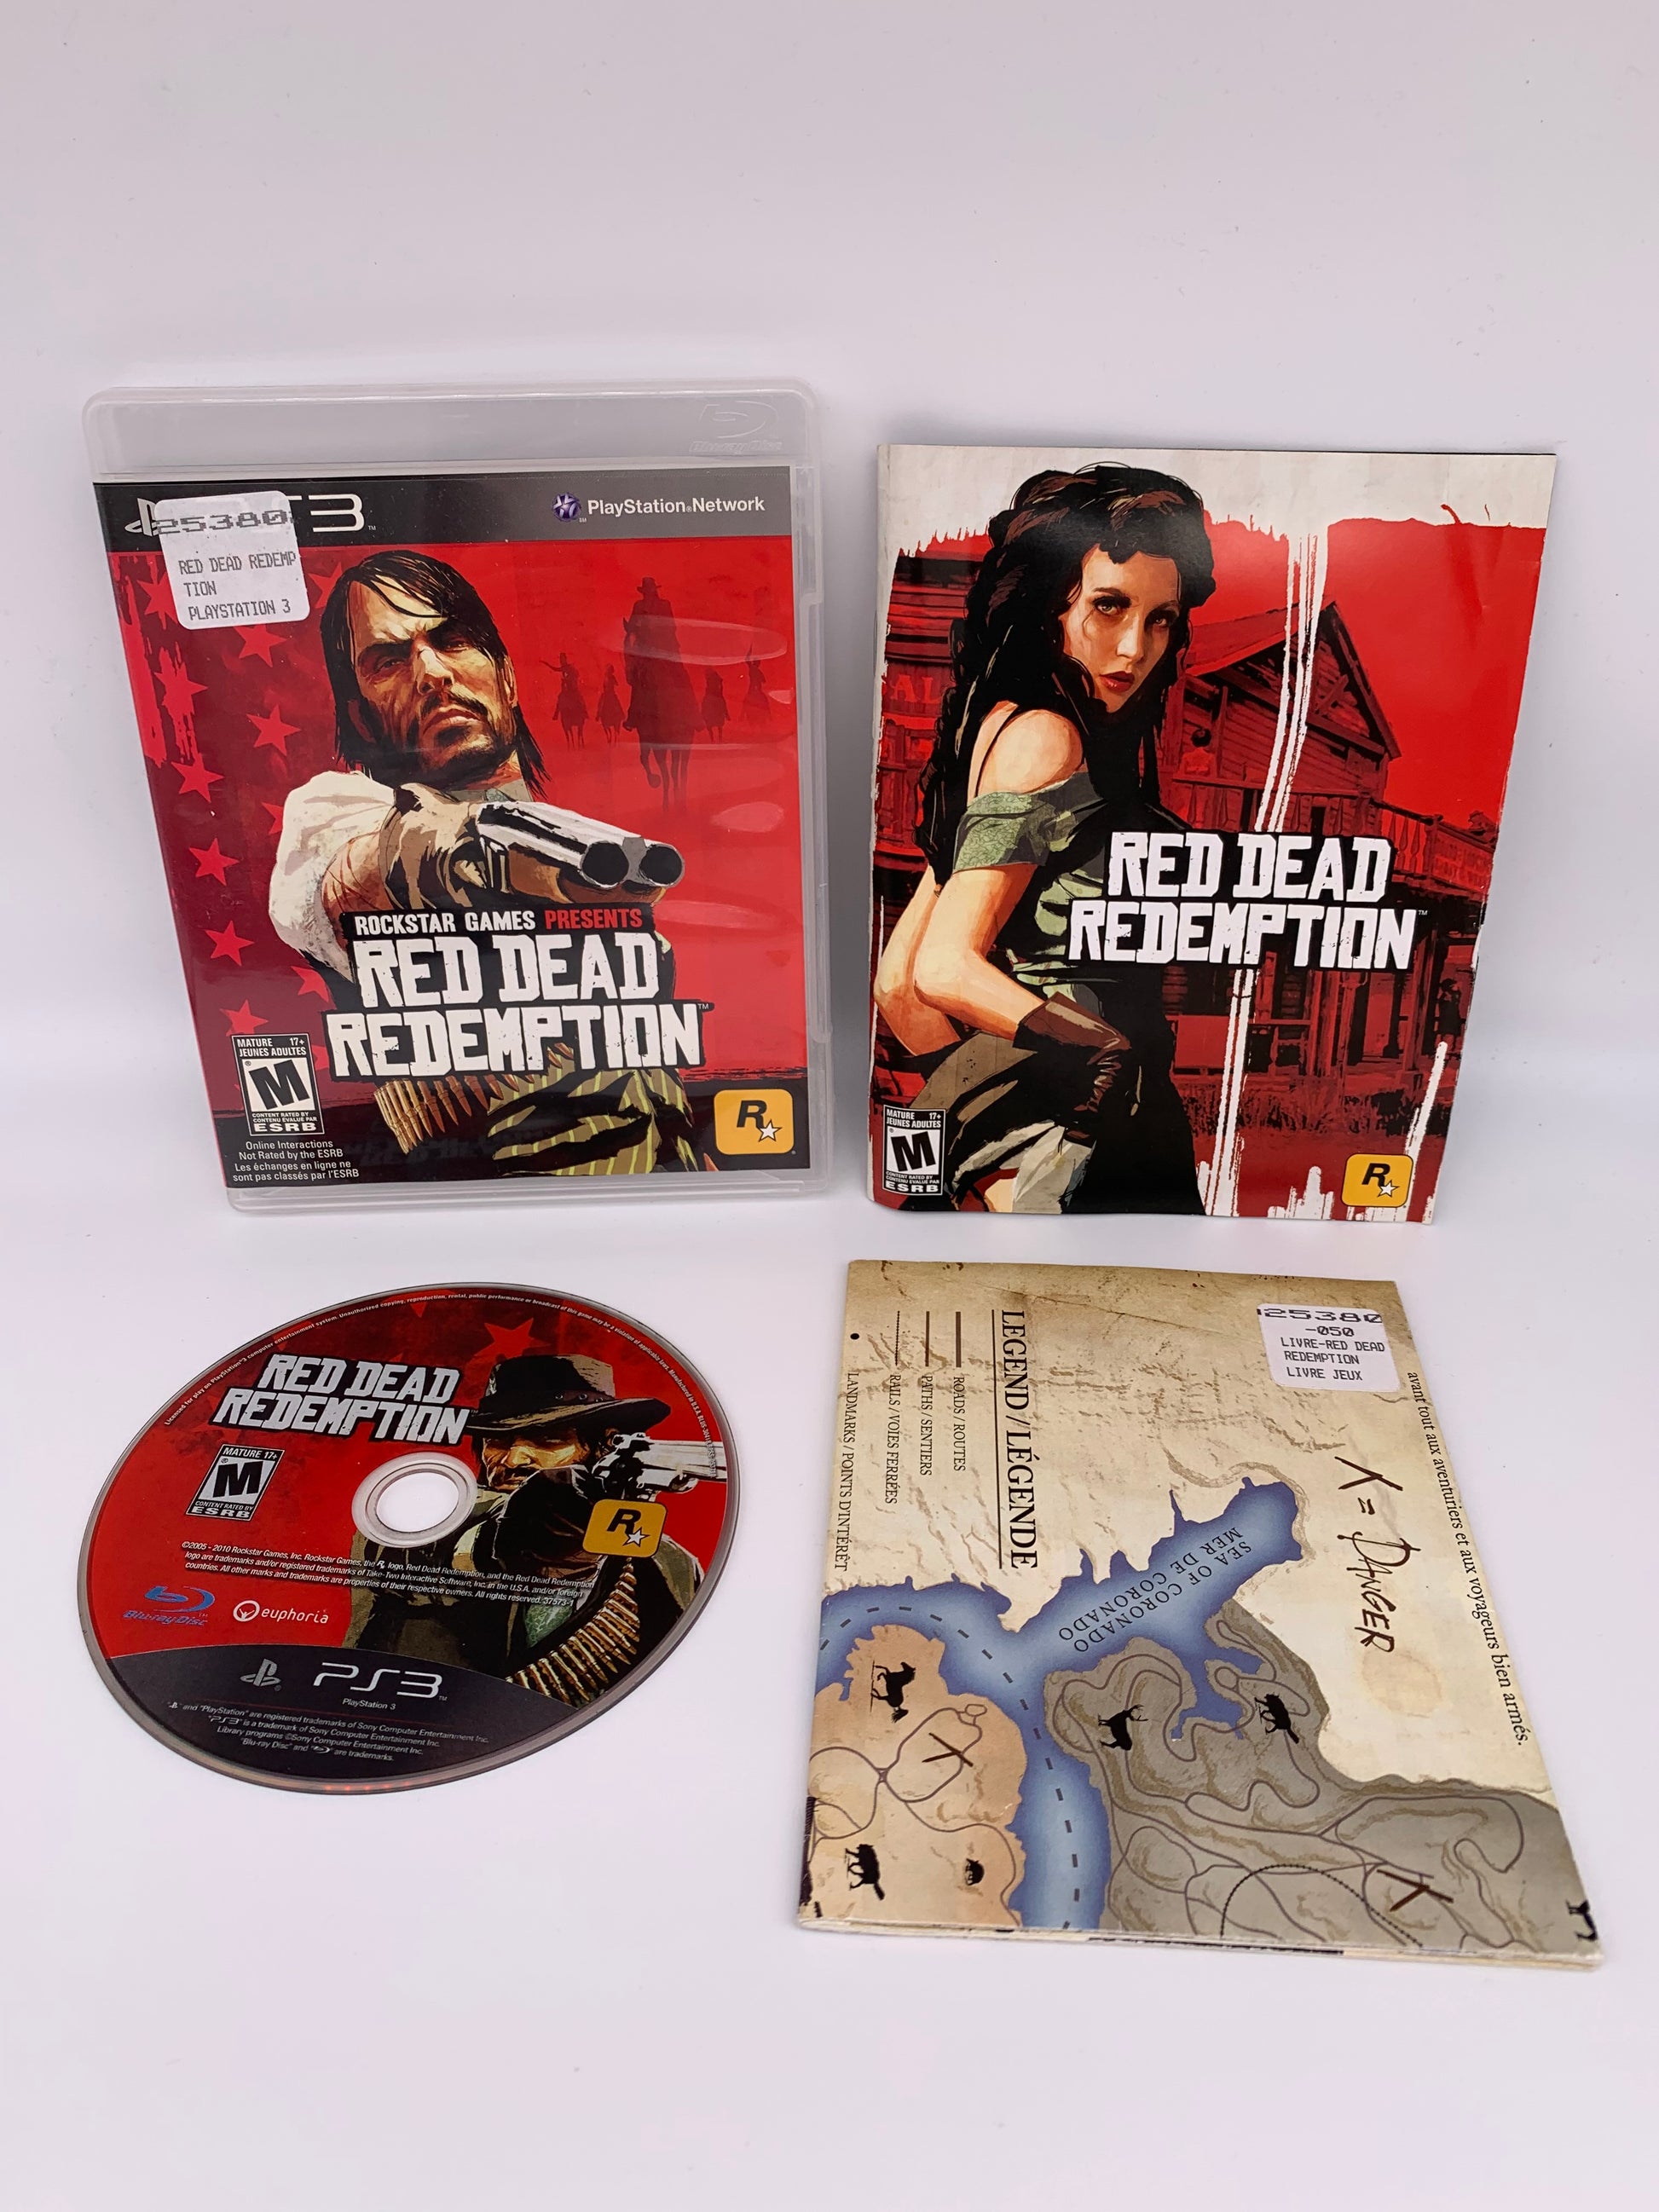 PiXEL-RETRO.COM : SONY PLAYSTATION 3 (PS3) COMPLETE IN BOX CIB MANUAL GAME NTSC RED DEAD REDEMPTION